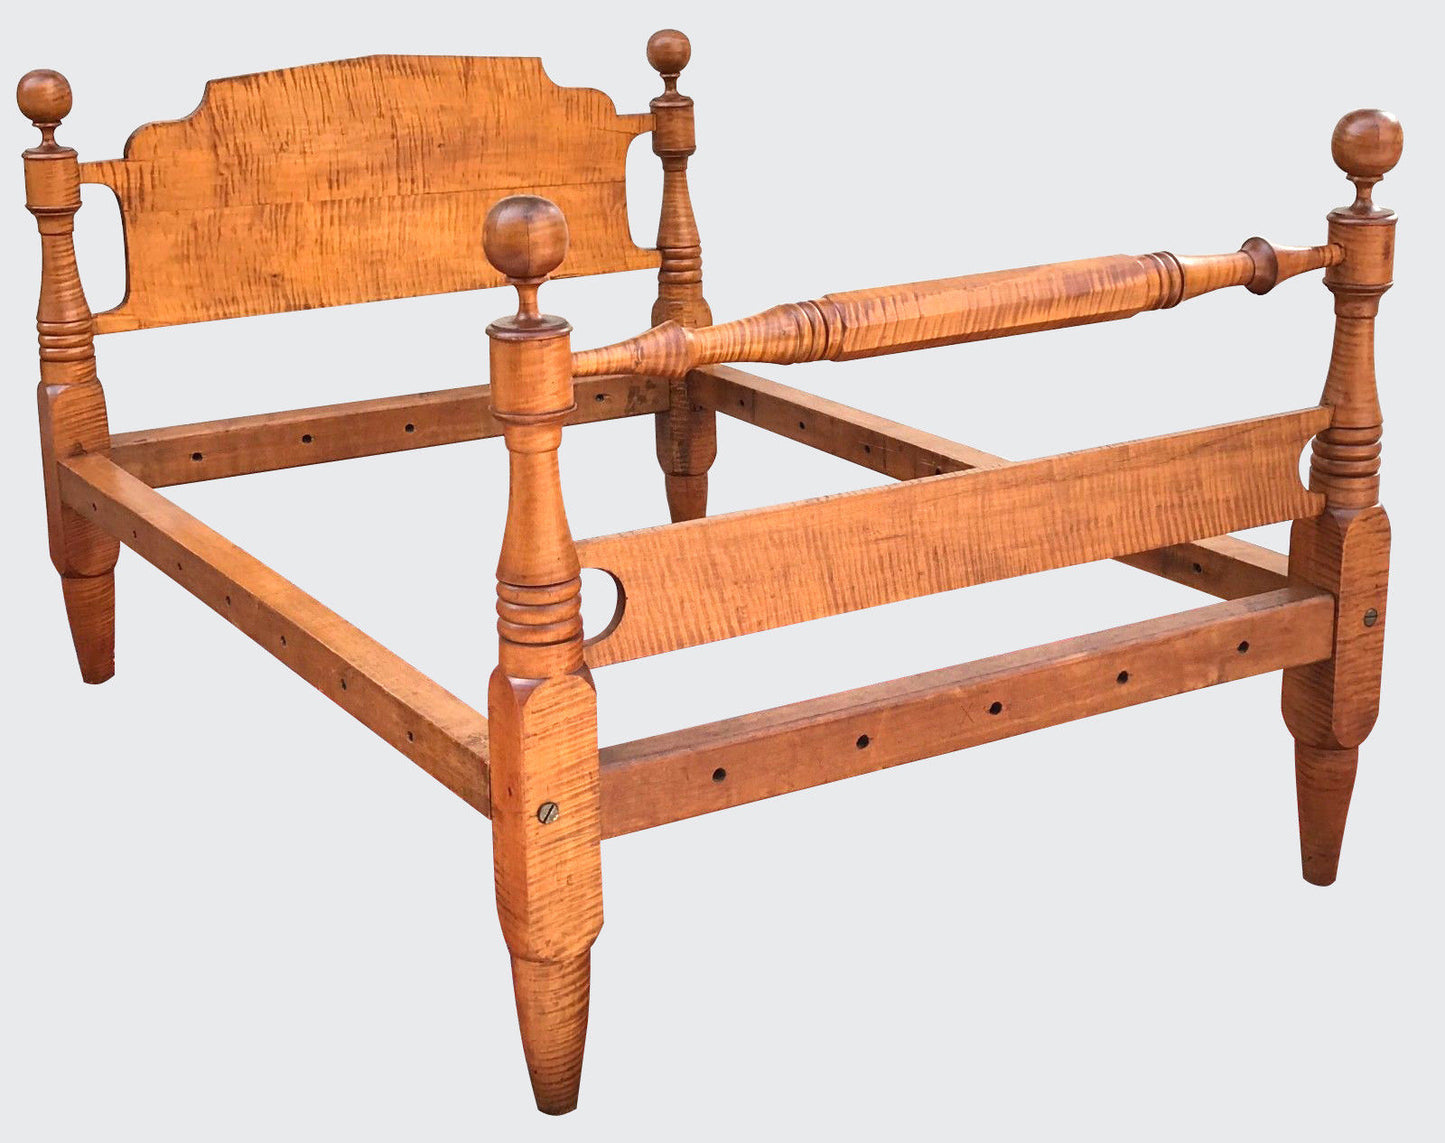 EXCEPTIONALLY FINE SOLID TIGER MAPLE FEDERAL CANNONBALL BED-BOLDEST & BEST GRAIN